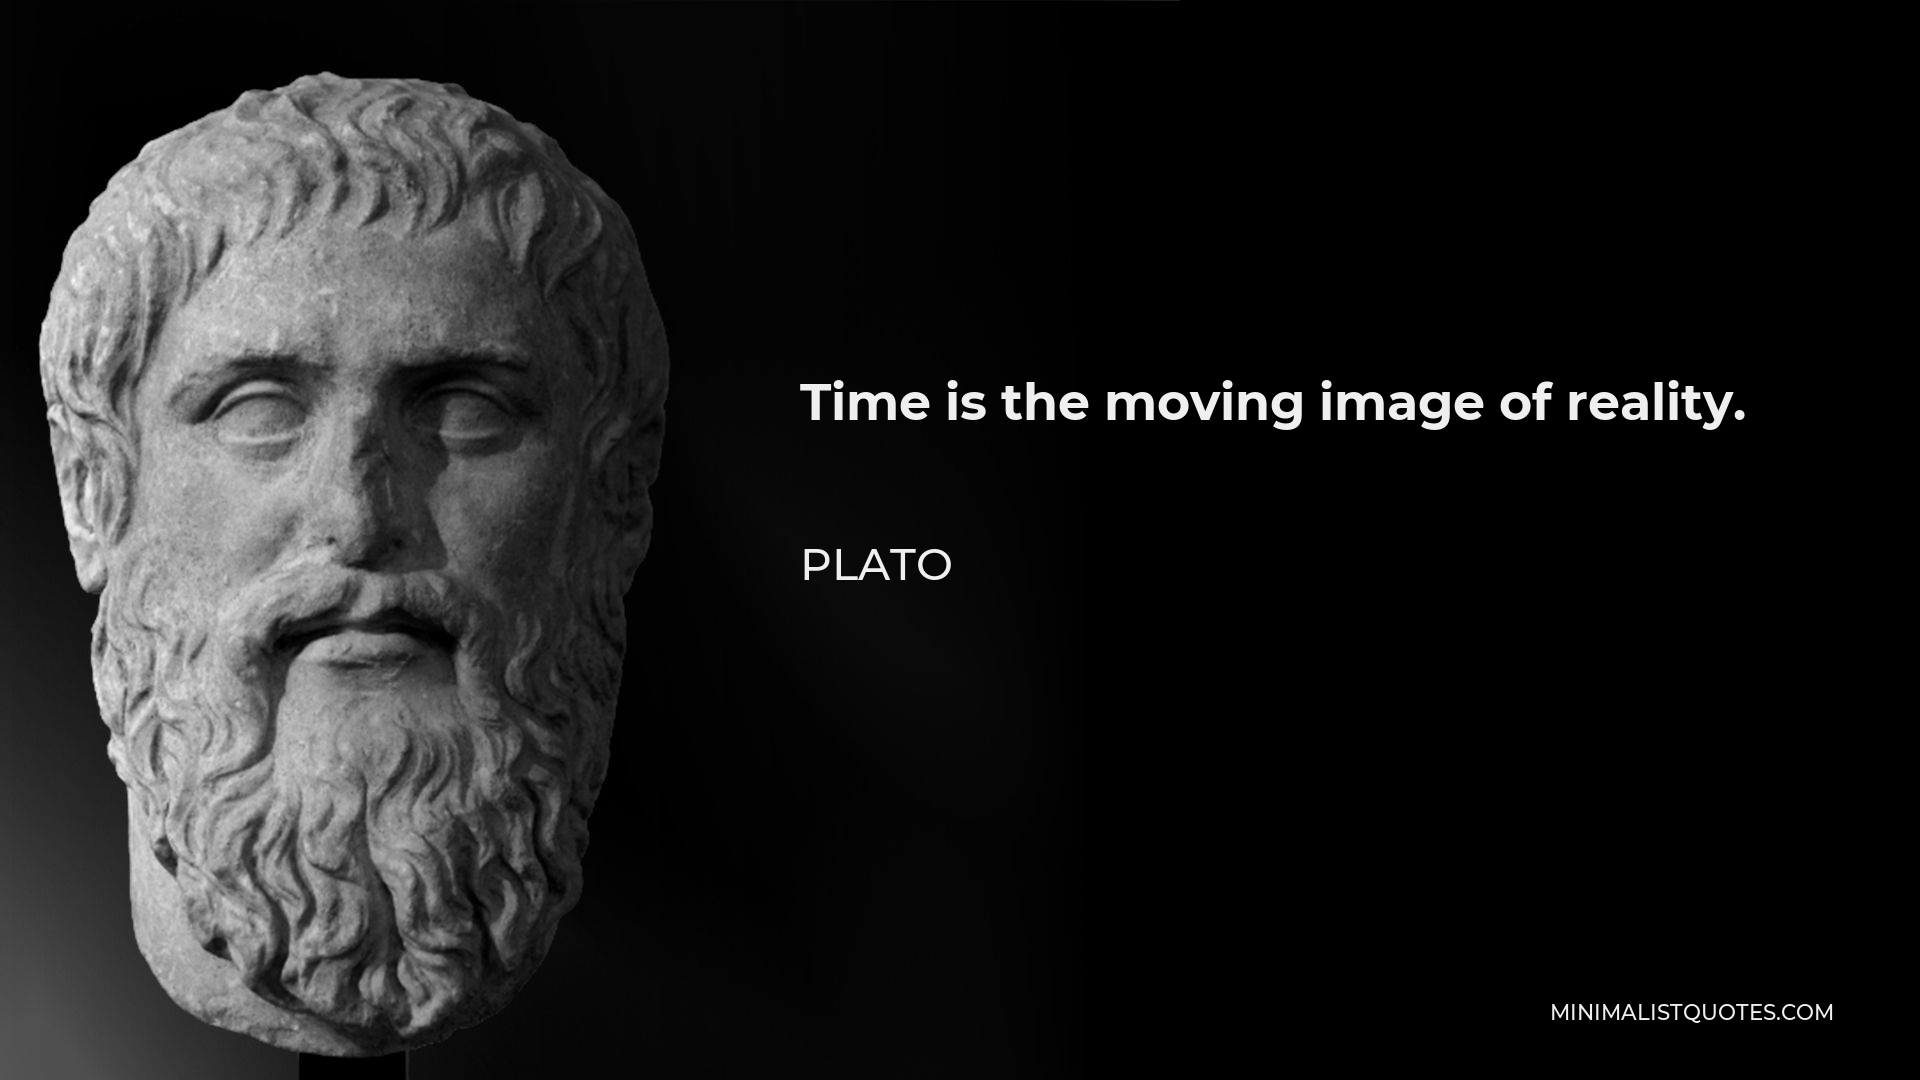 Plato Quote - Time is the moving image of reality.